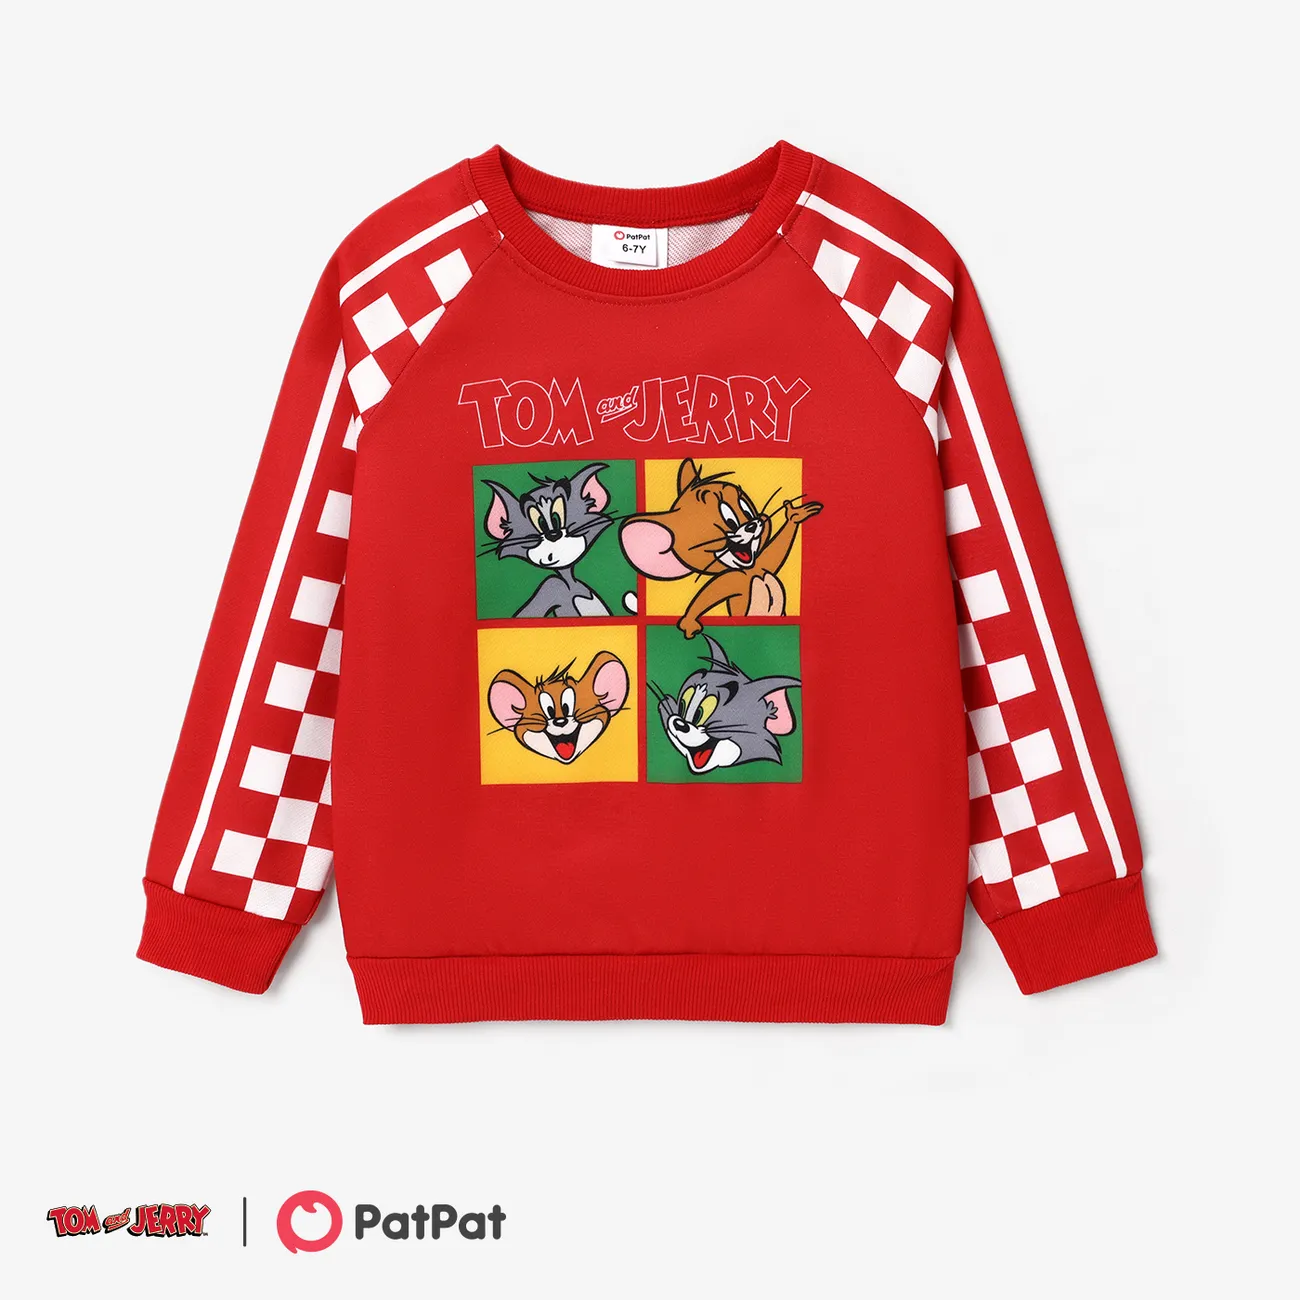 Tom and Jerry Family Boys' Checkerboard Pattern Crew Neck Sweatshirt Red big image 1